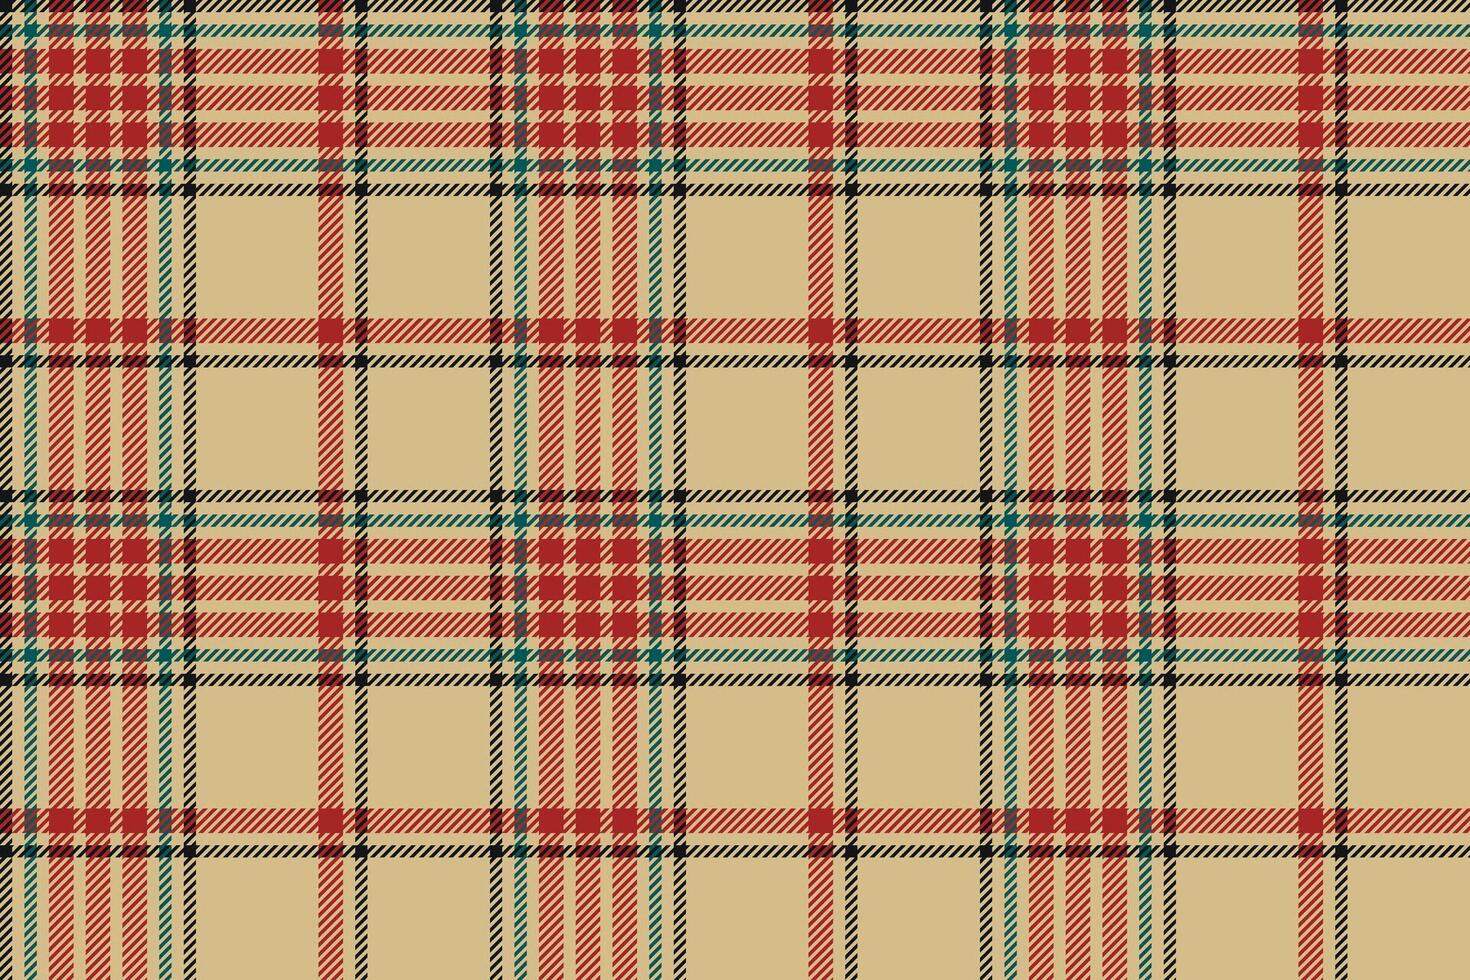 Plaid background, check seamless pattern in beige. Vector fabric texture for textile print, wrapping paper, gift card or wallpaper.